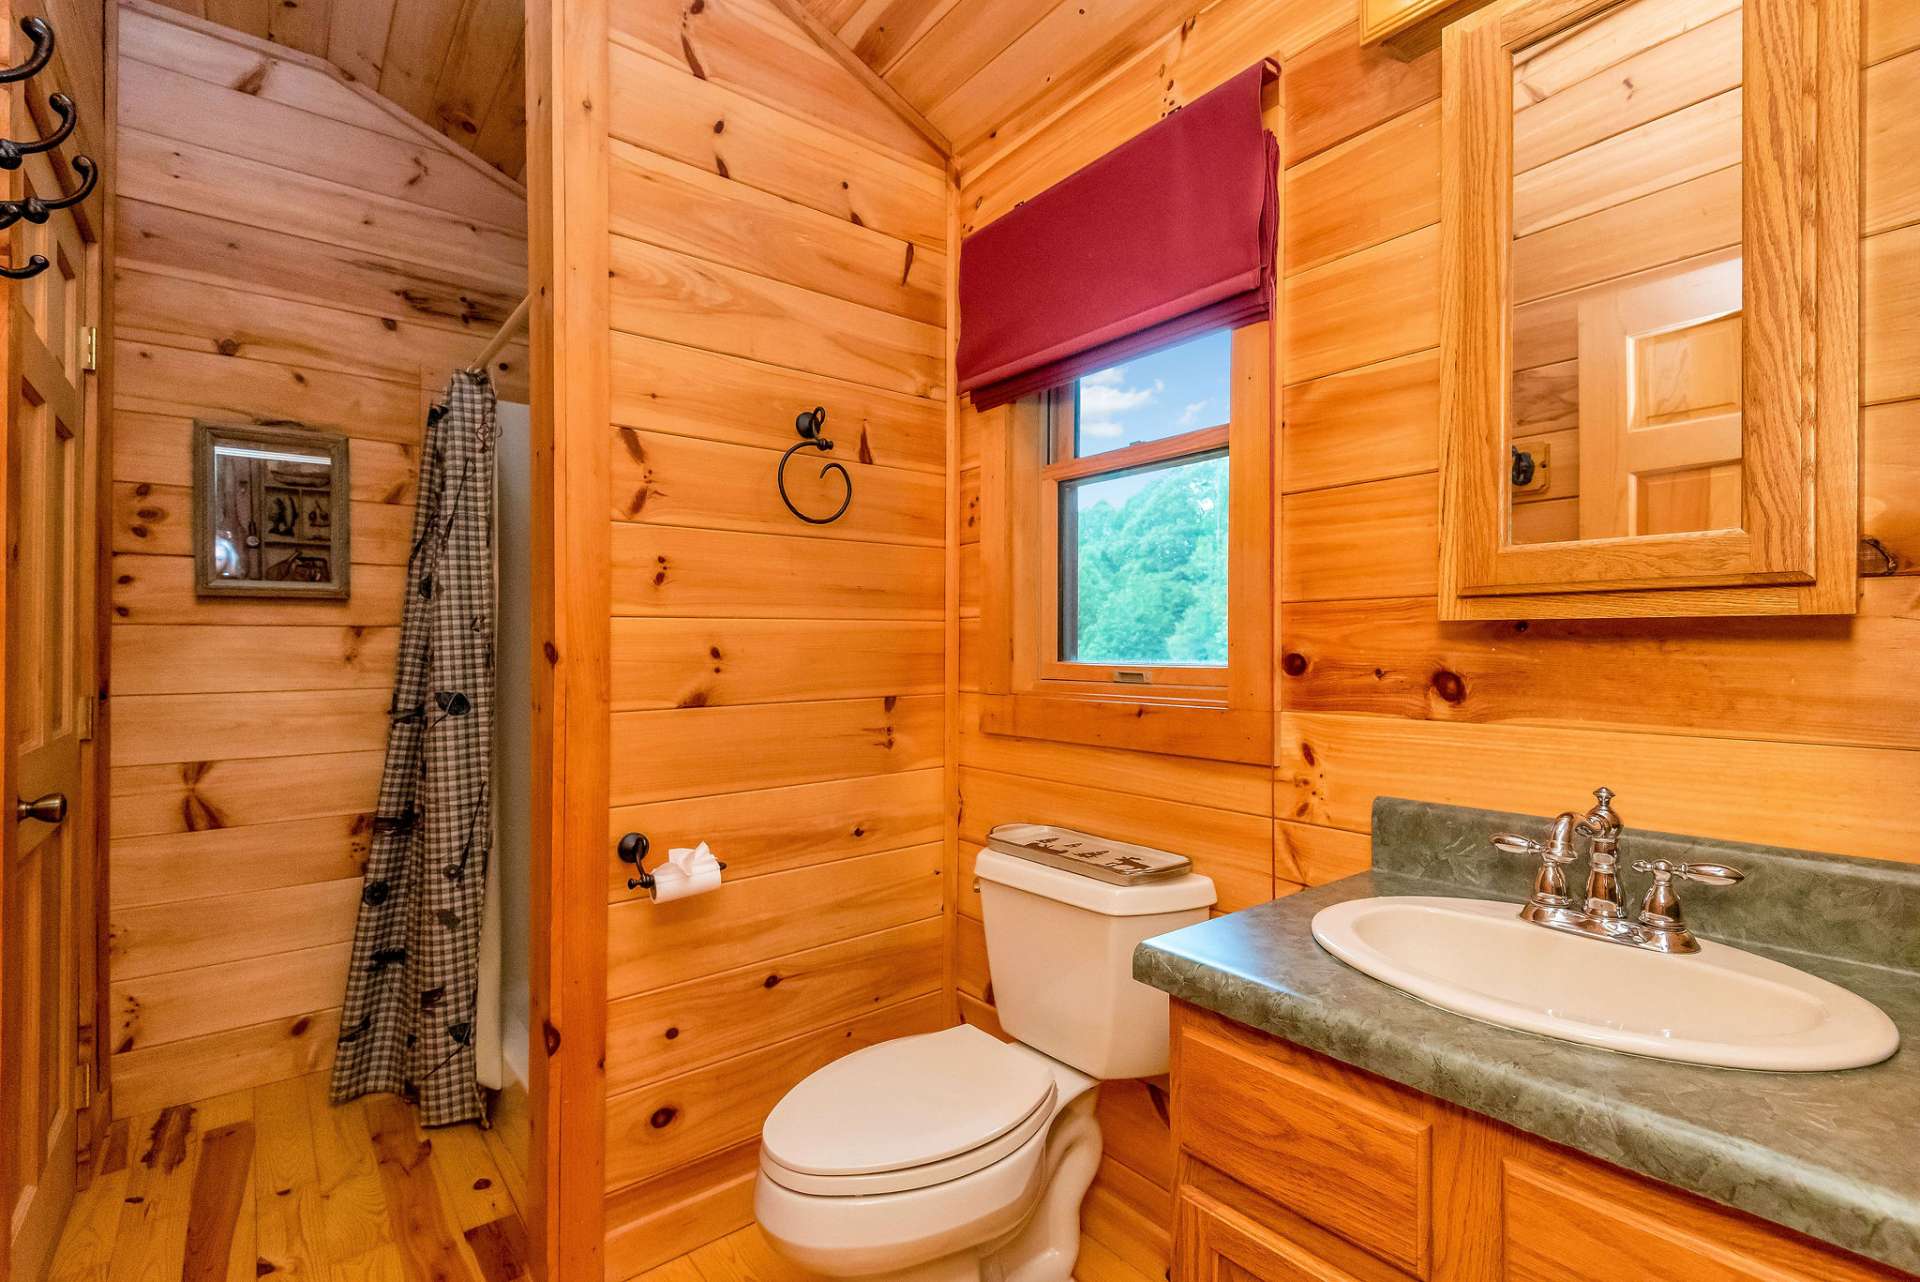 A full bath in the loft area ensures this space is accommodating for both guests and residents.